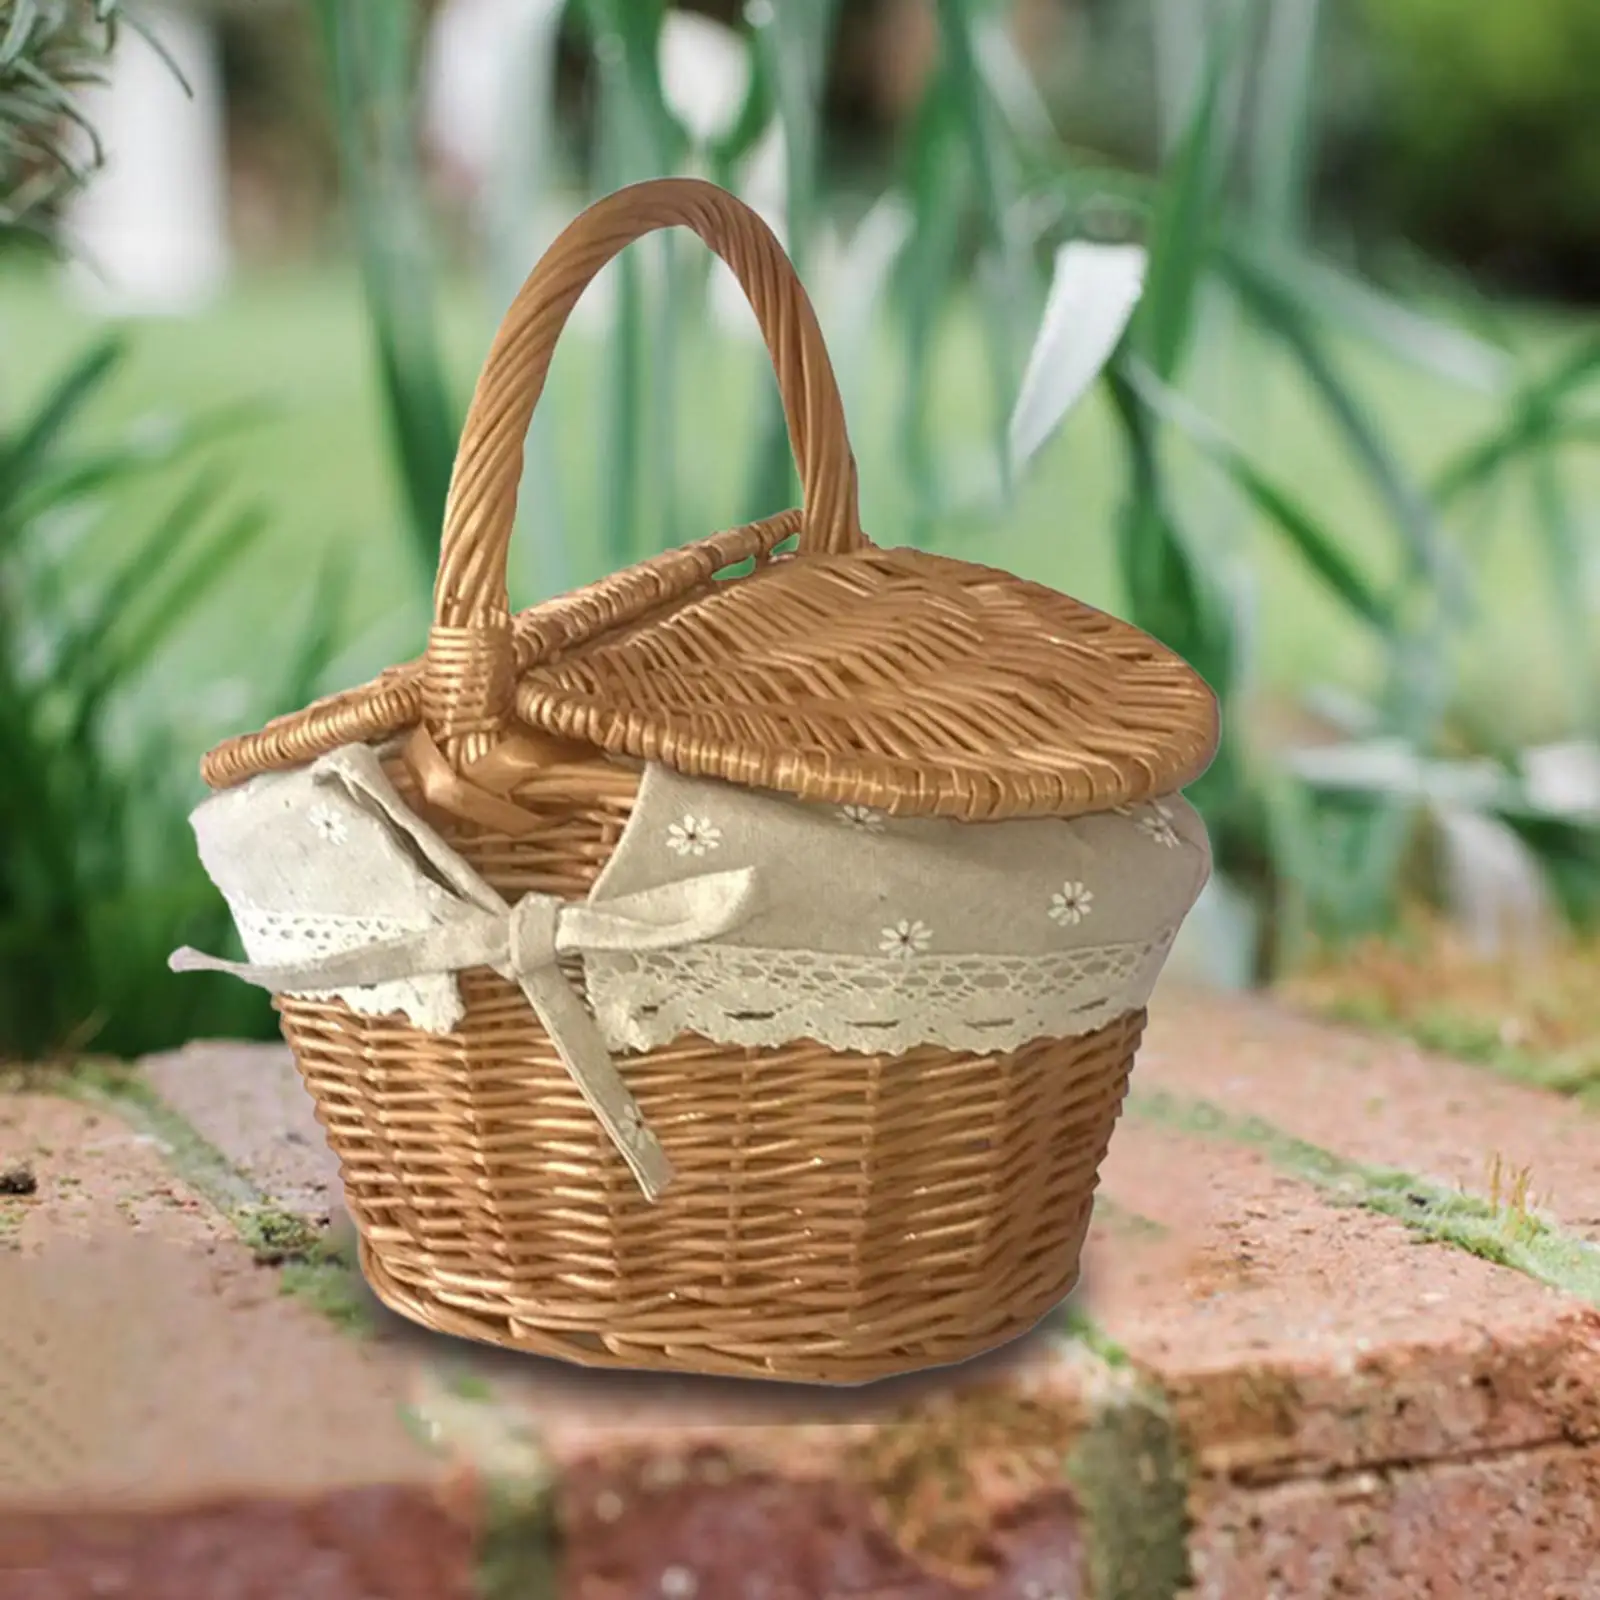 Rustic Wicker Picnic Basket with Washable Lining Rattan Storage Serving Basket for Outdoor Beach Hiking Camping